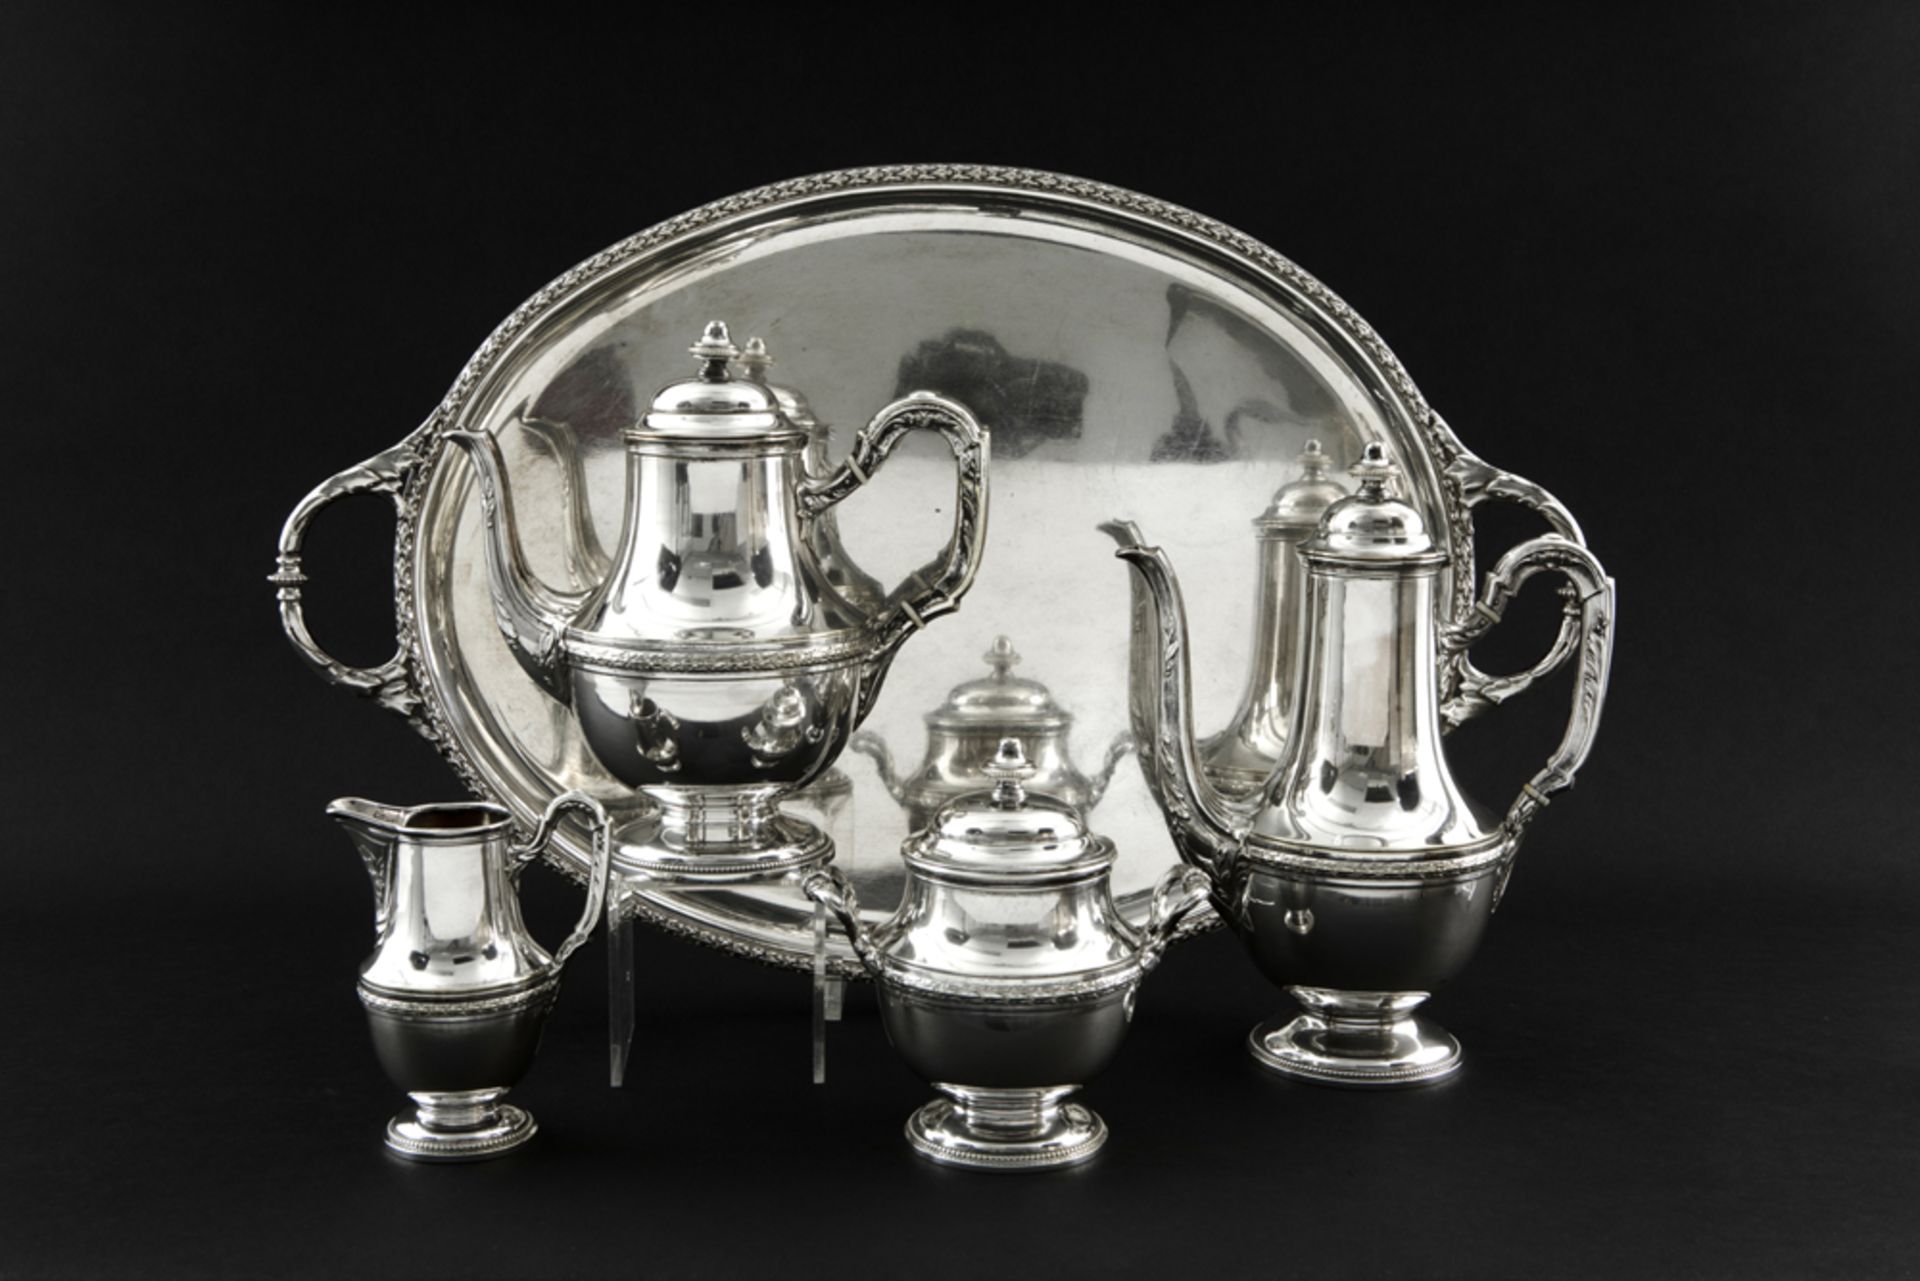 4pc coffee and tea-set on its tray ||Vierdelig koffie- en theestel op plateau - Image 2 of 2